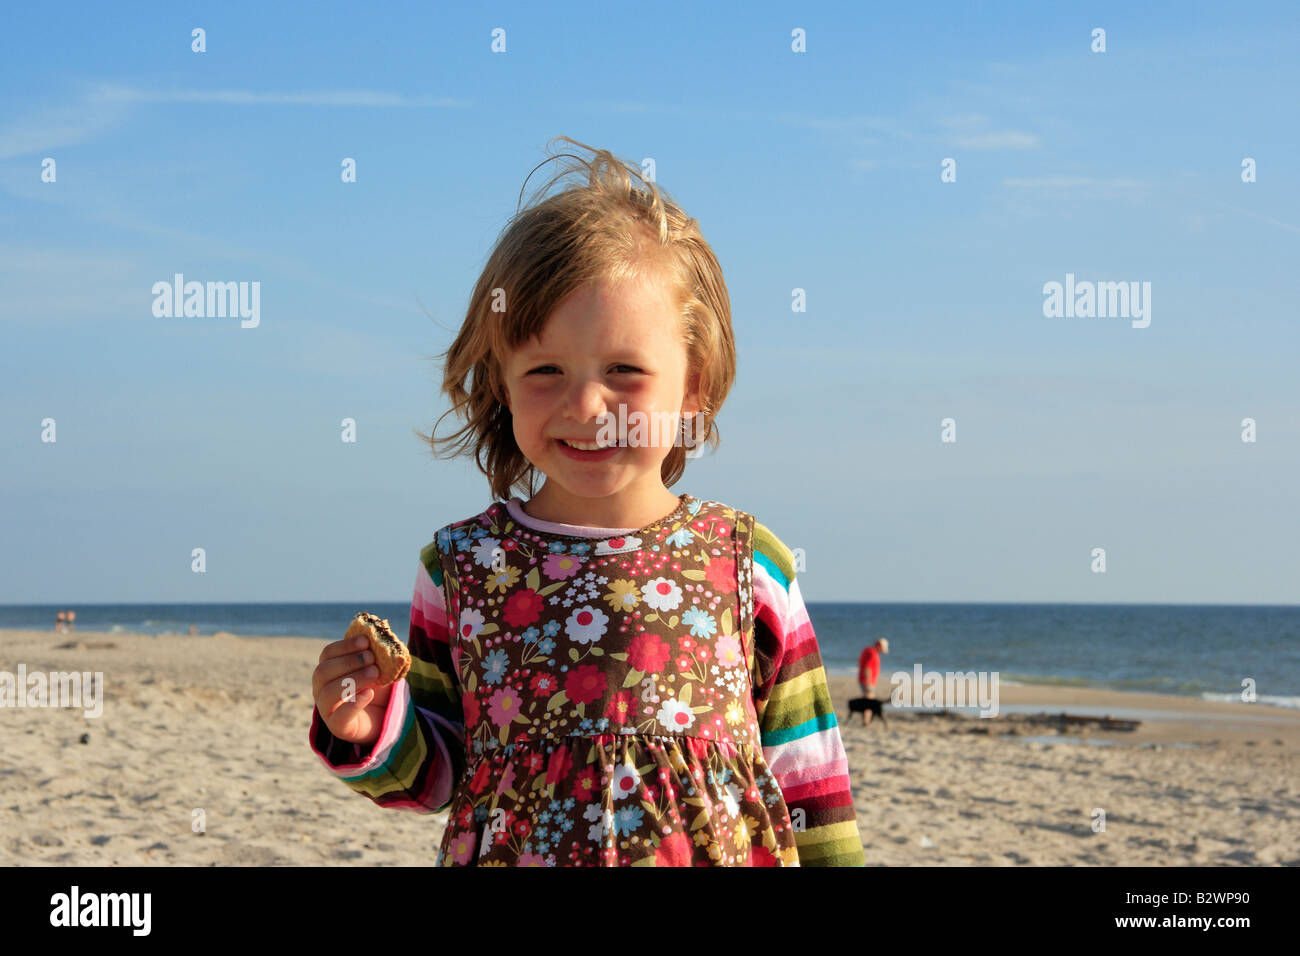 Smiling Girl on a beach Banque D'Images